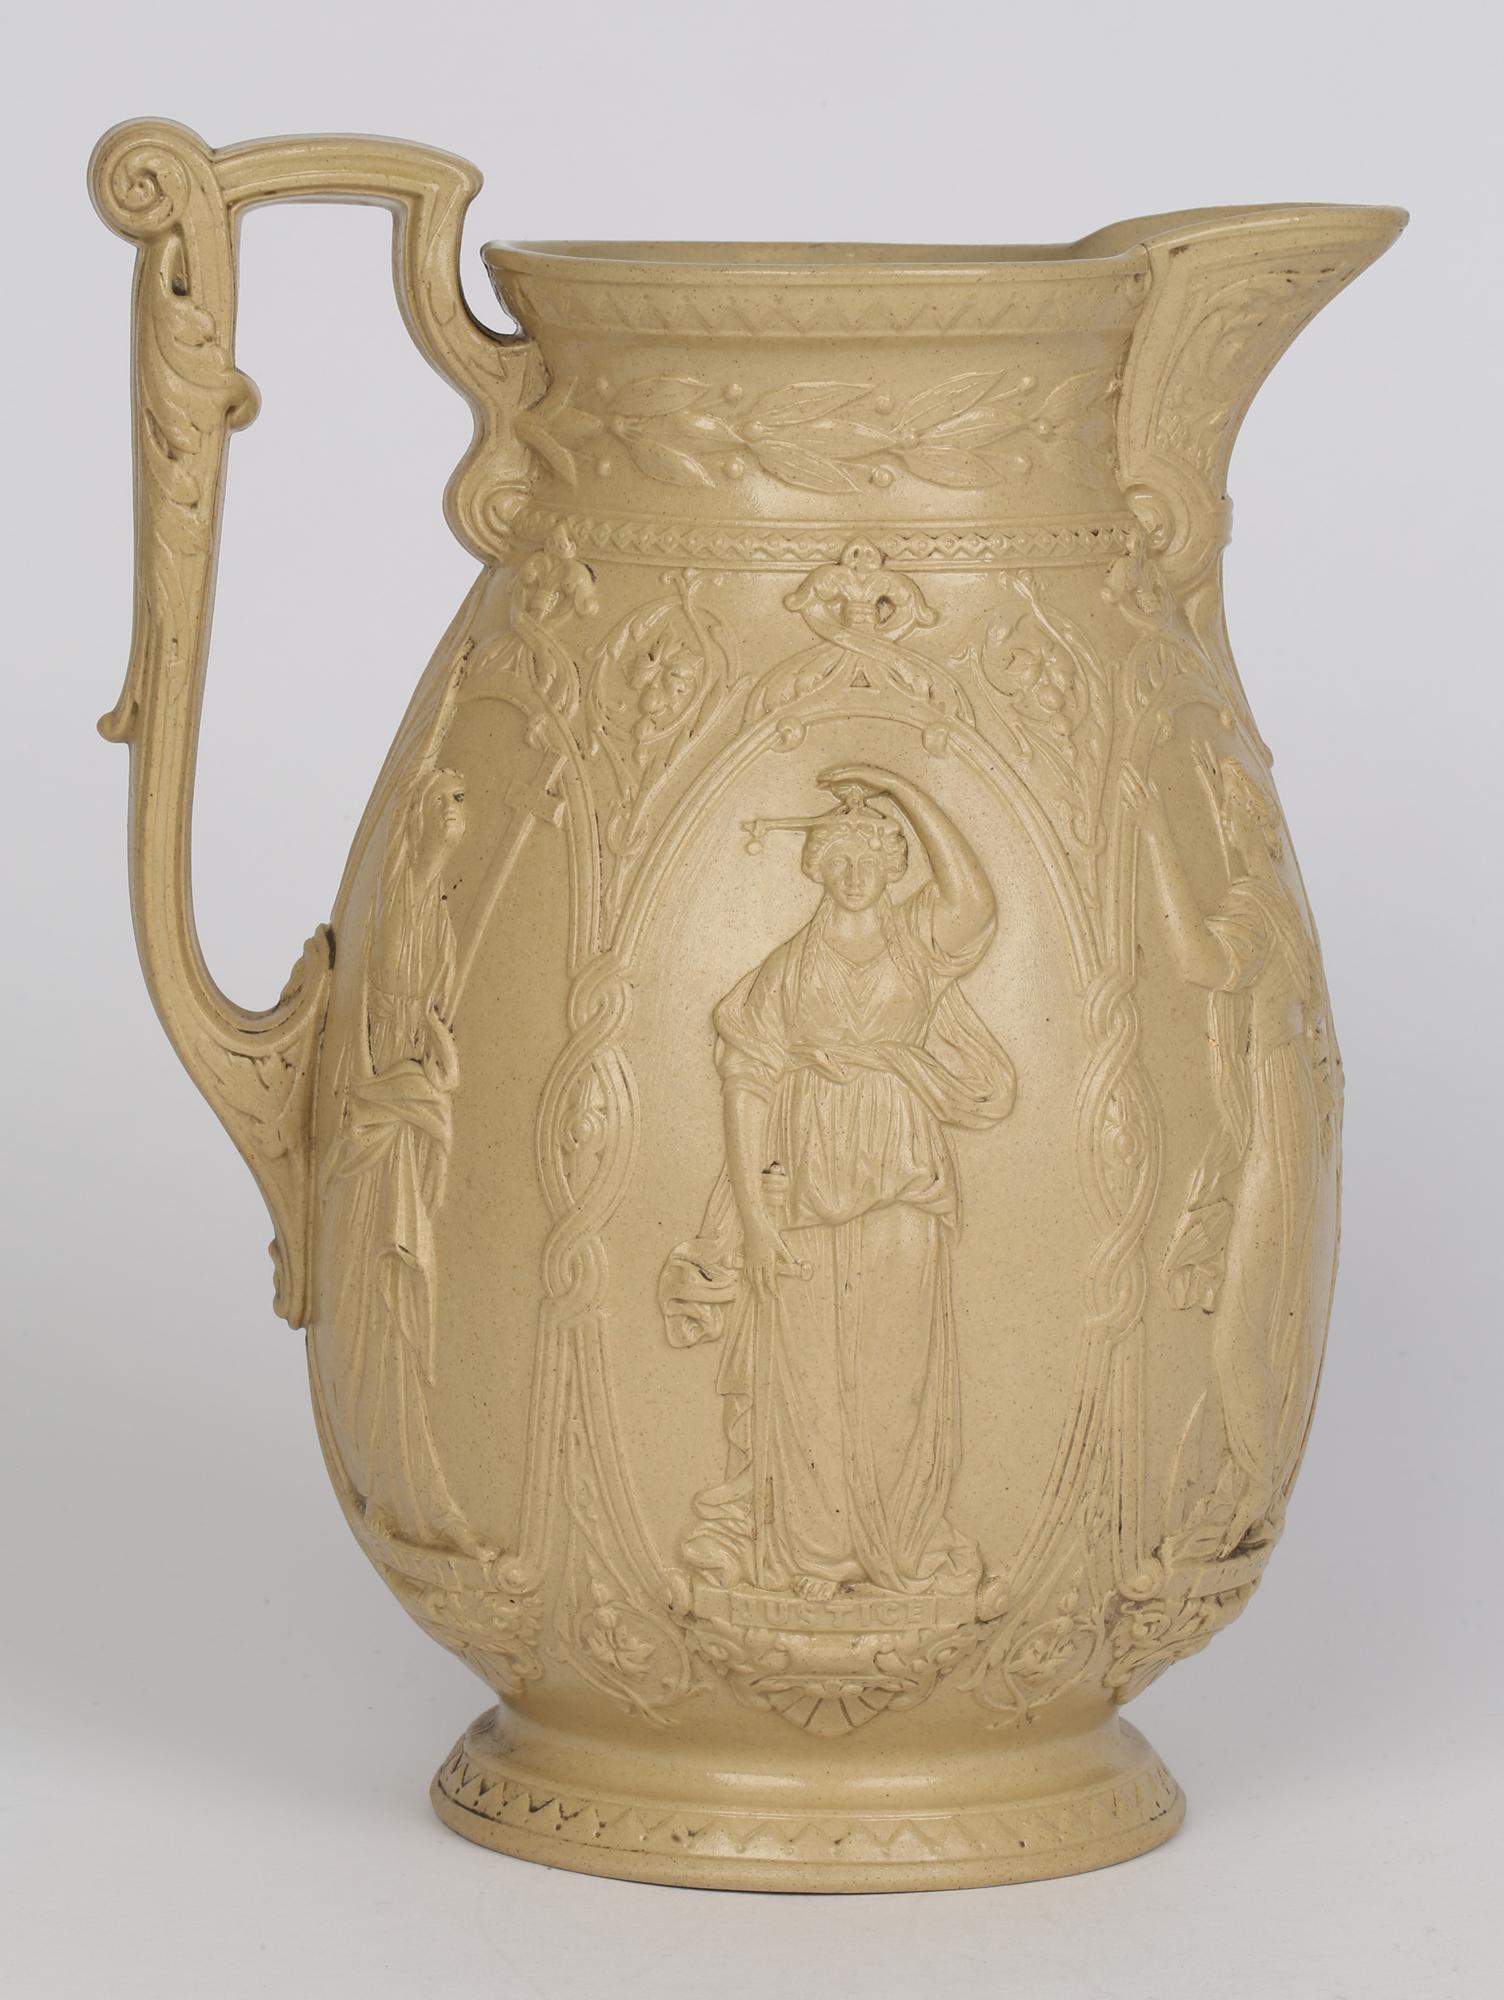 Old Hall Drabware Ceramic Jug with Female Cardinal Virtues Figures For Sale 5